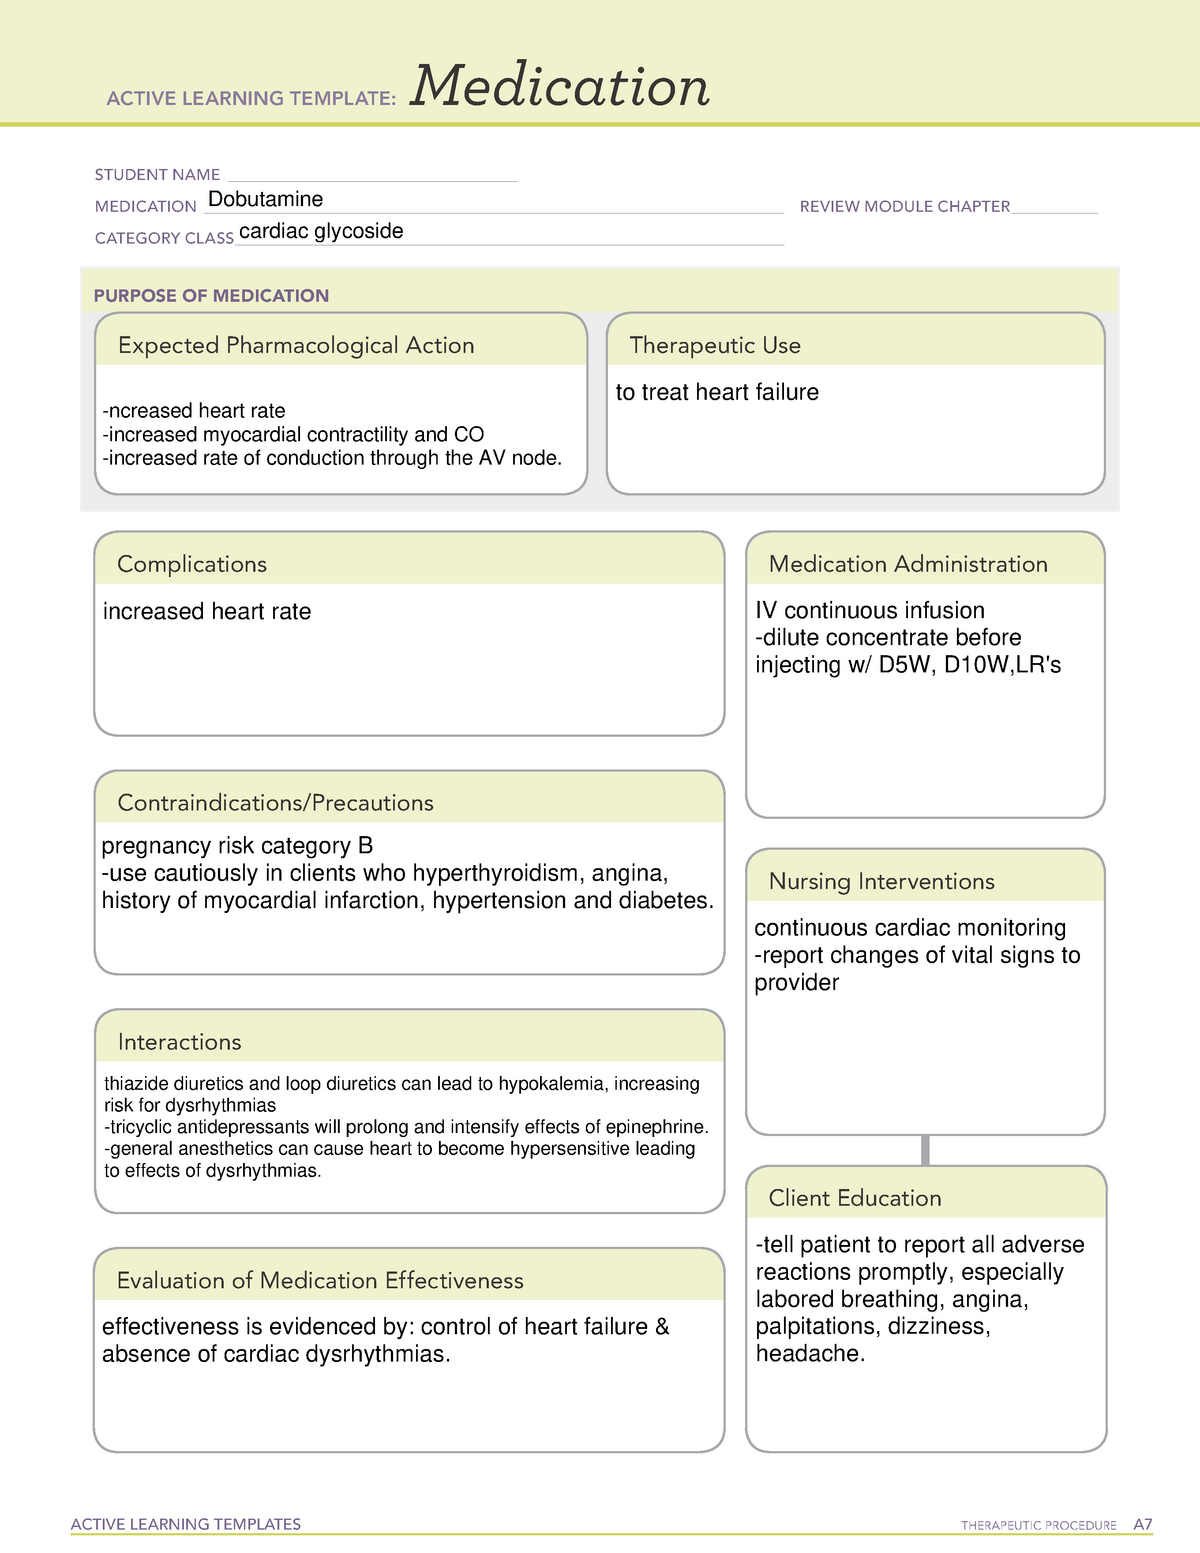 Ati Medication Template Diazepam Docx Active Learning Template